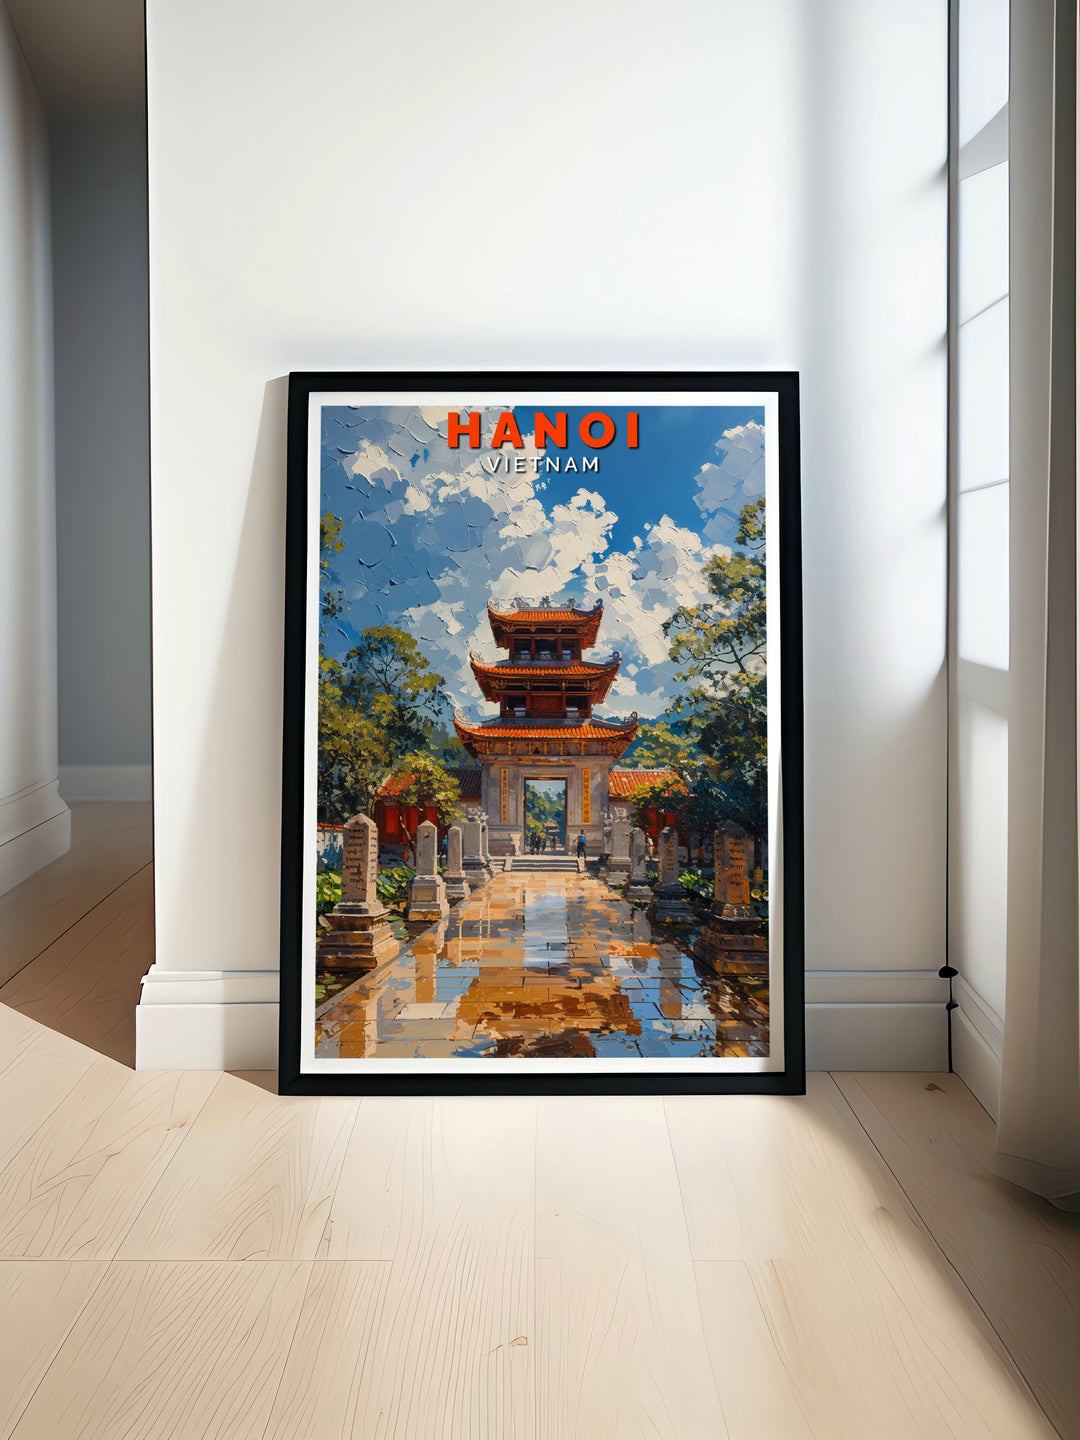 Featuring the serene ponds and ancient trees of the Temple of Literature, this art print captures the cultural richness and beauty of Hanoi.